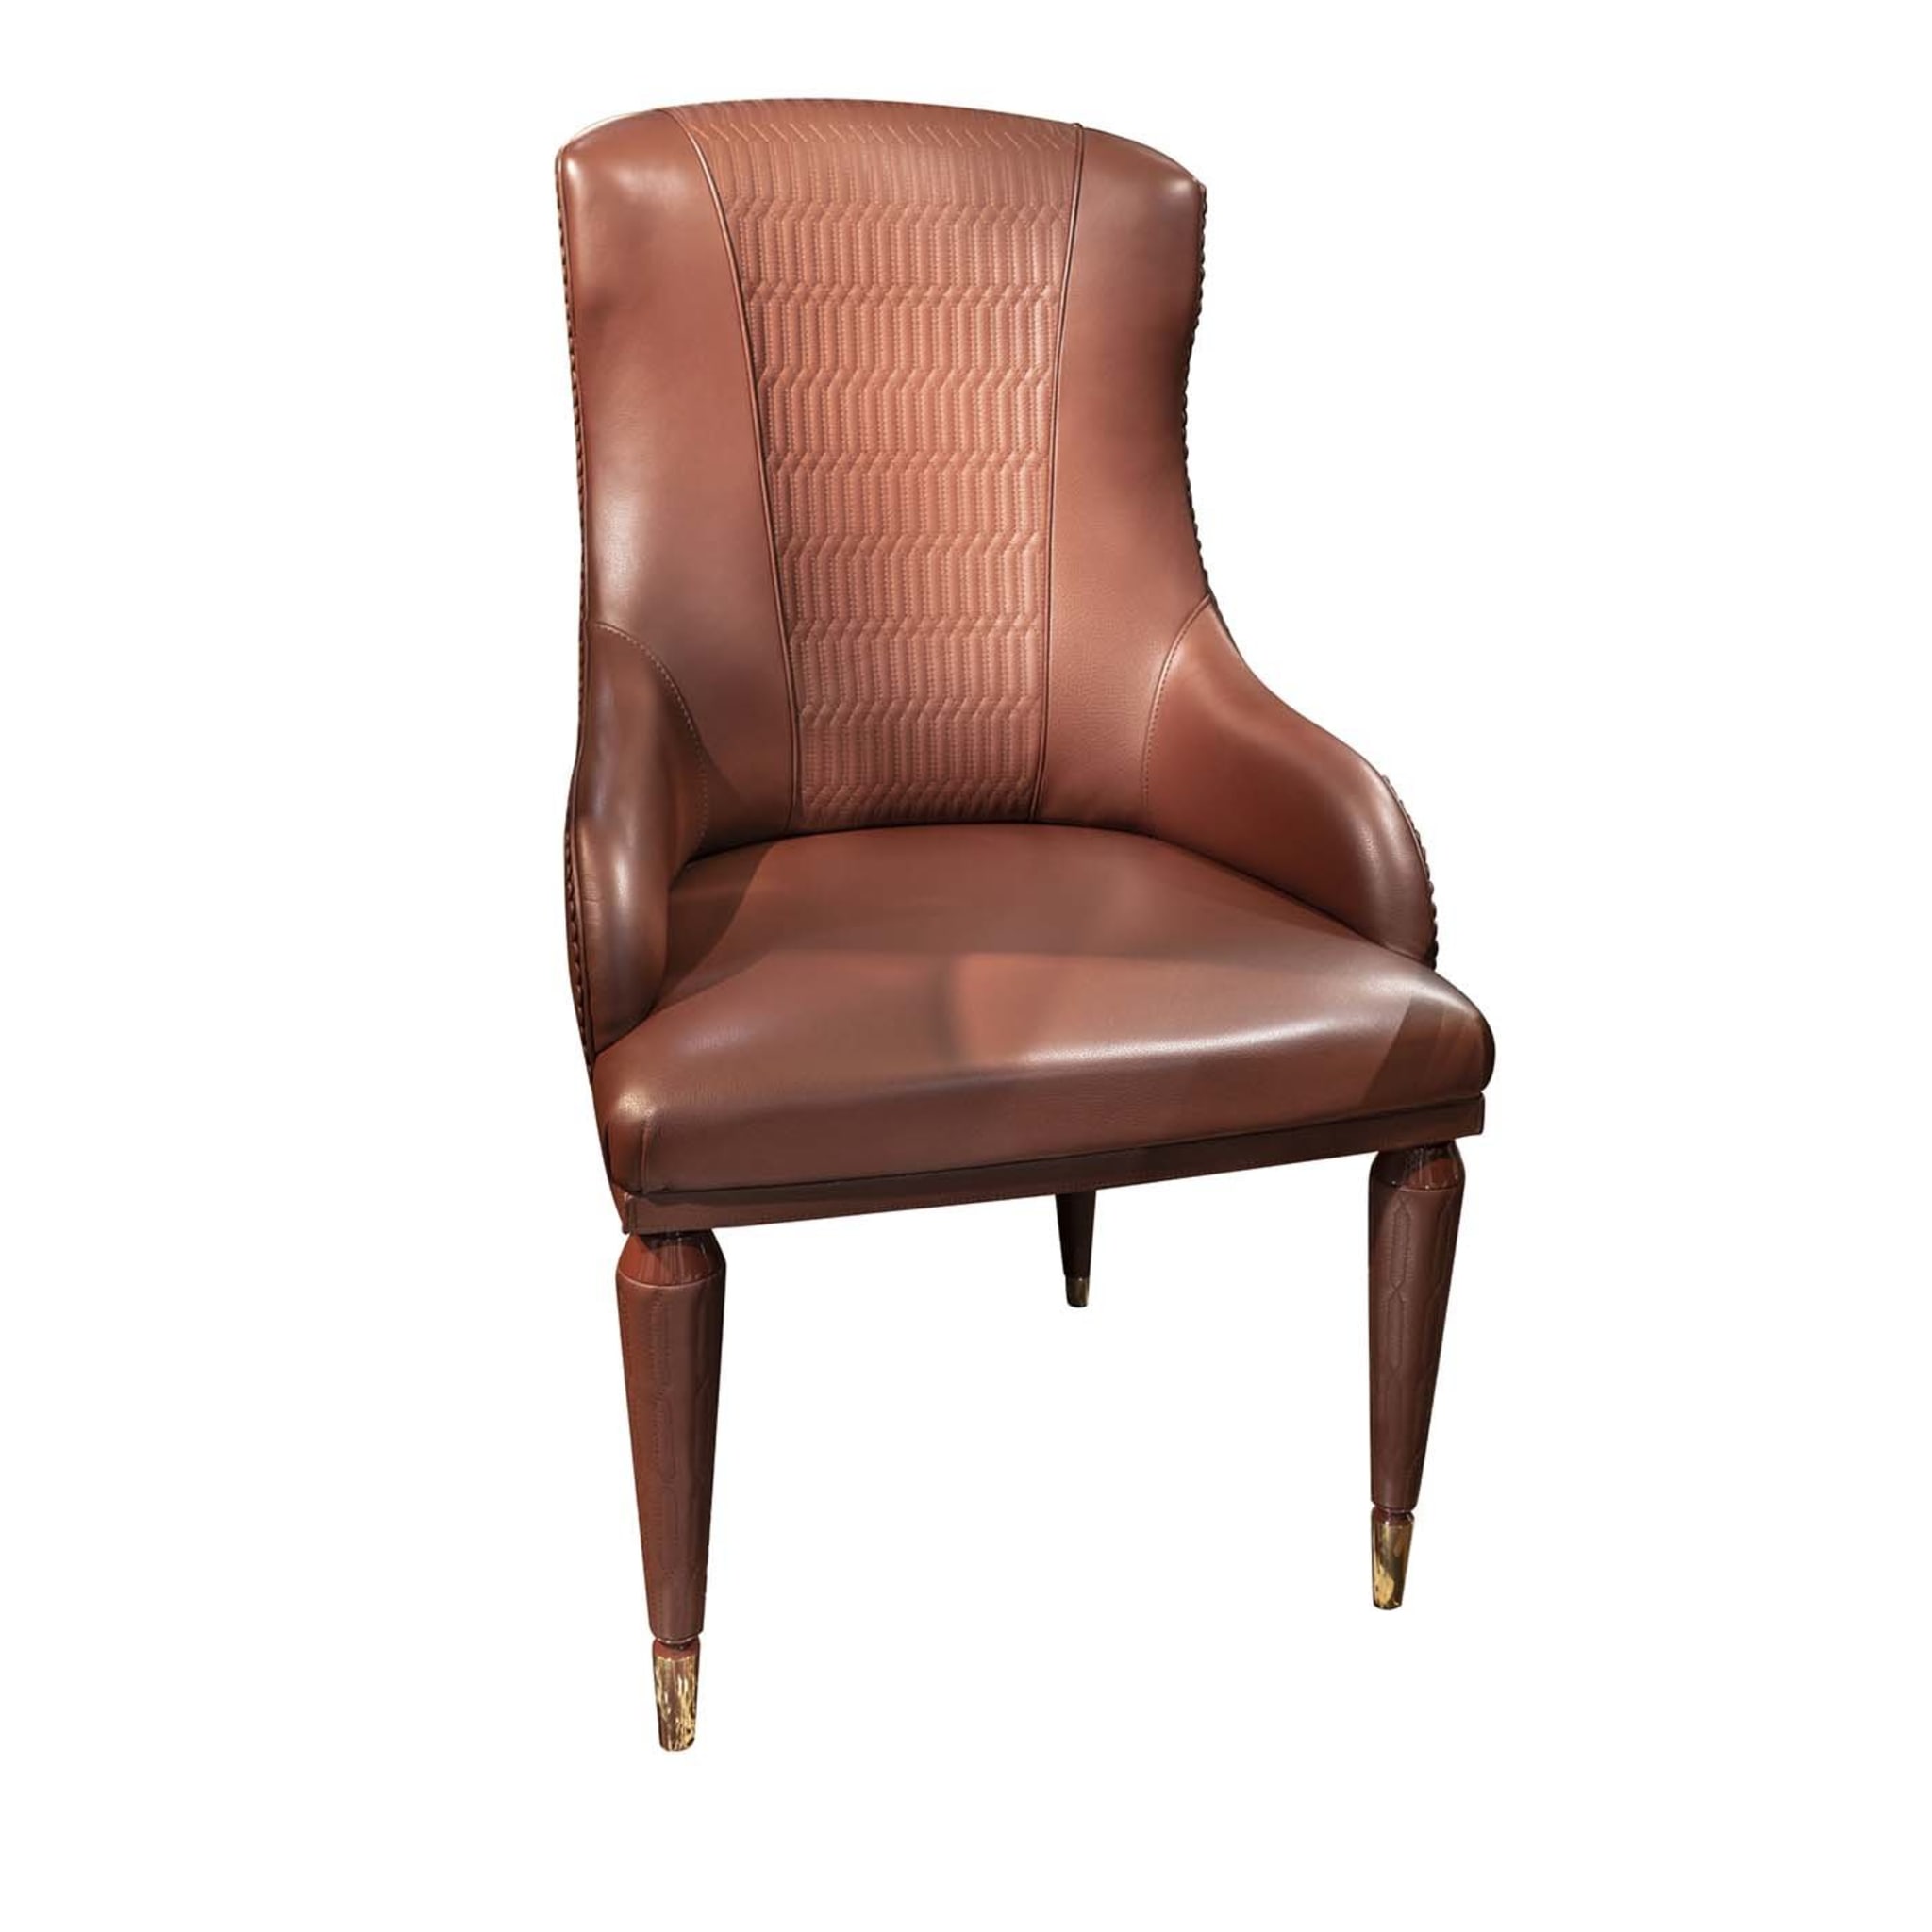 Diletta dining chair with armrests - Main view